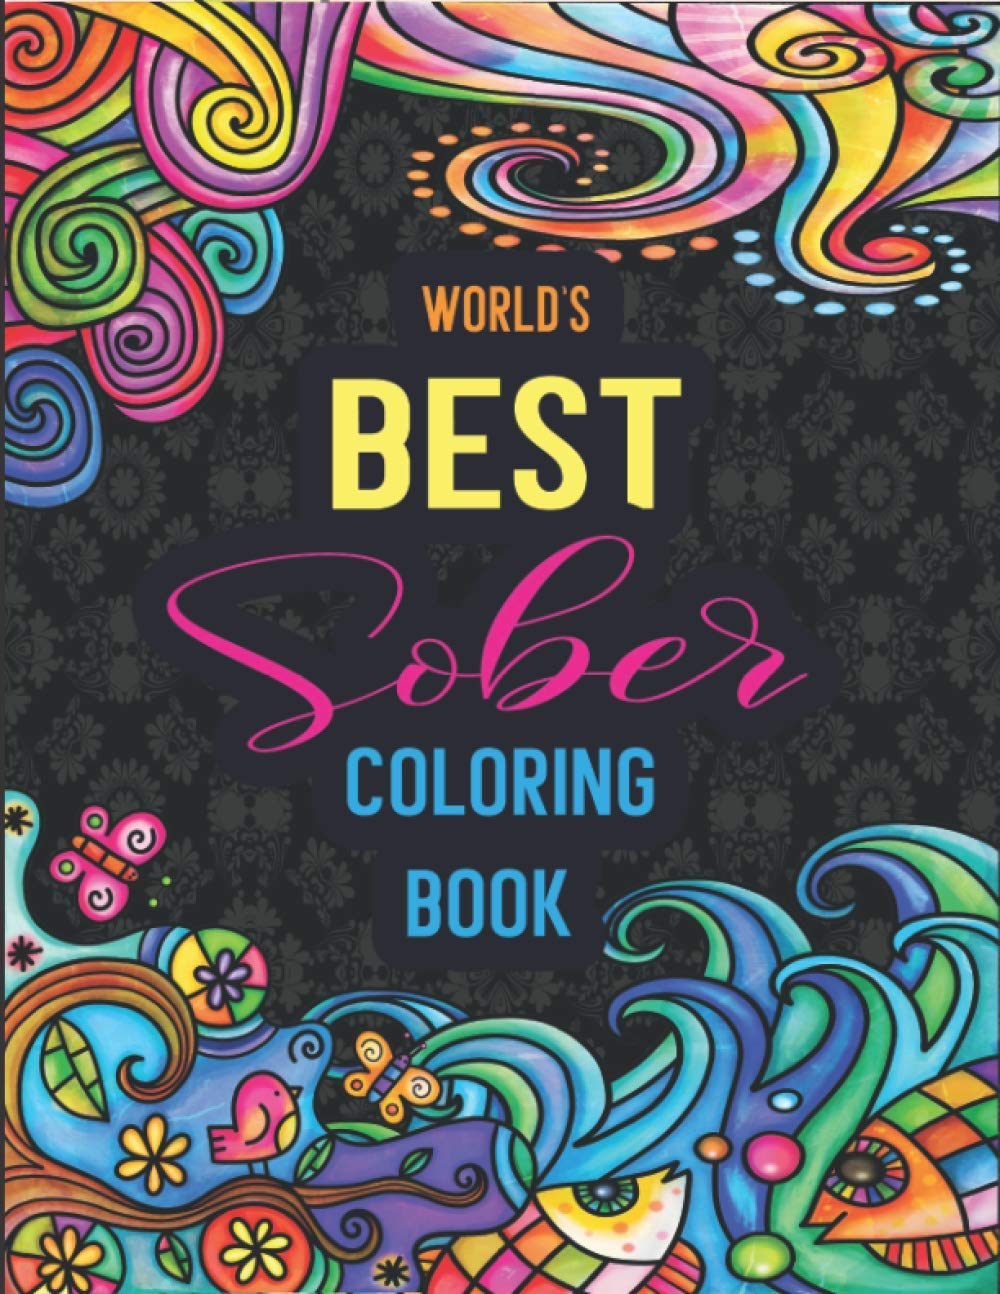 World's best sober coloring book